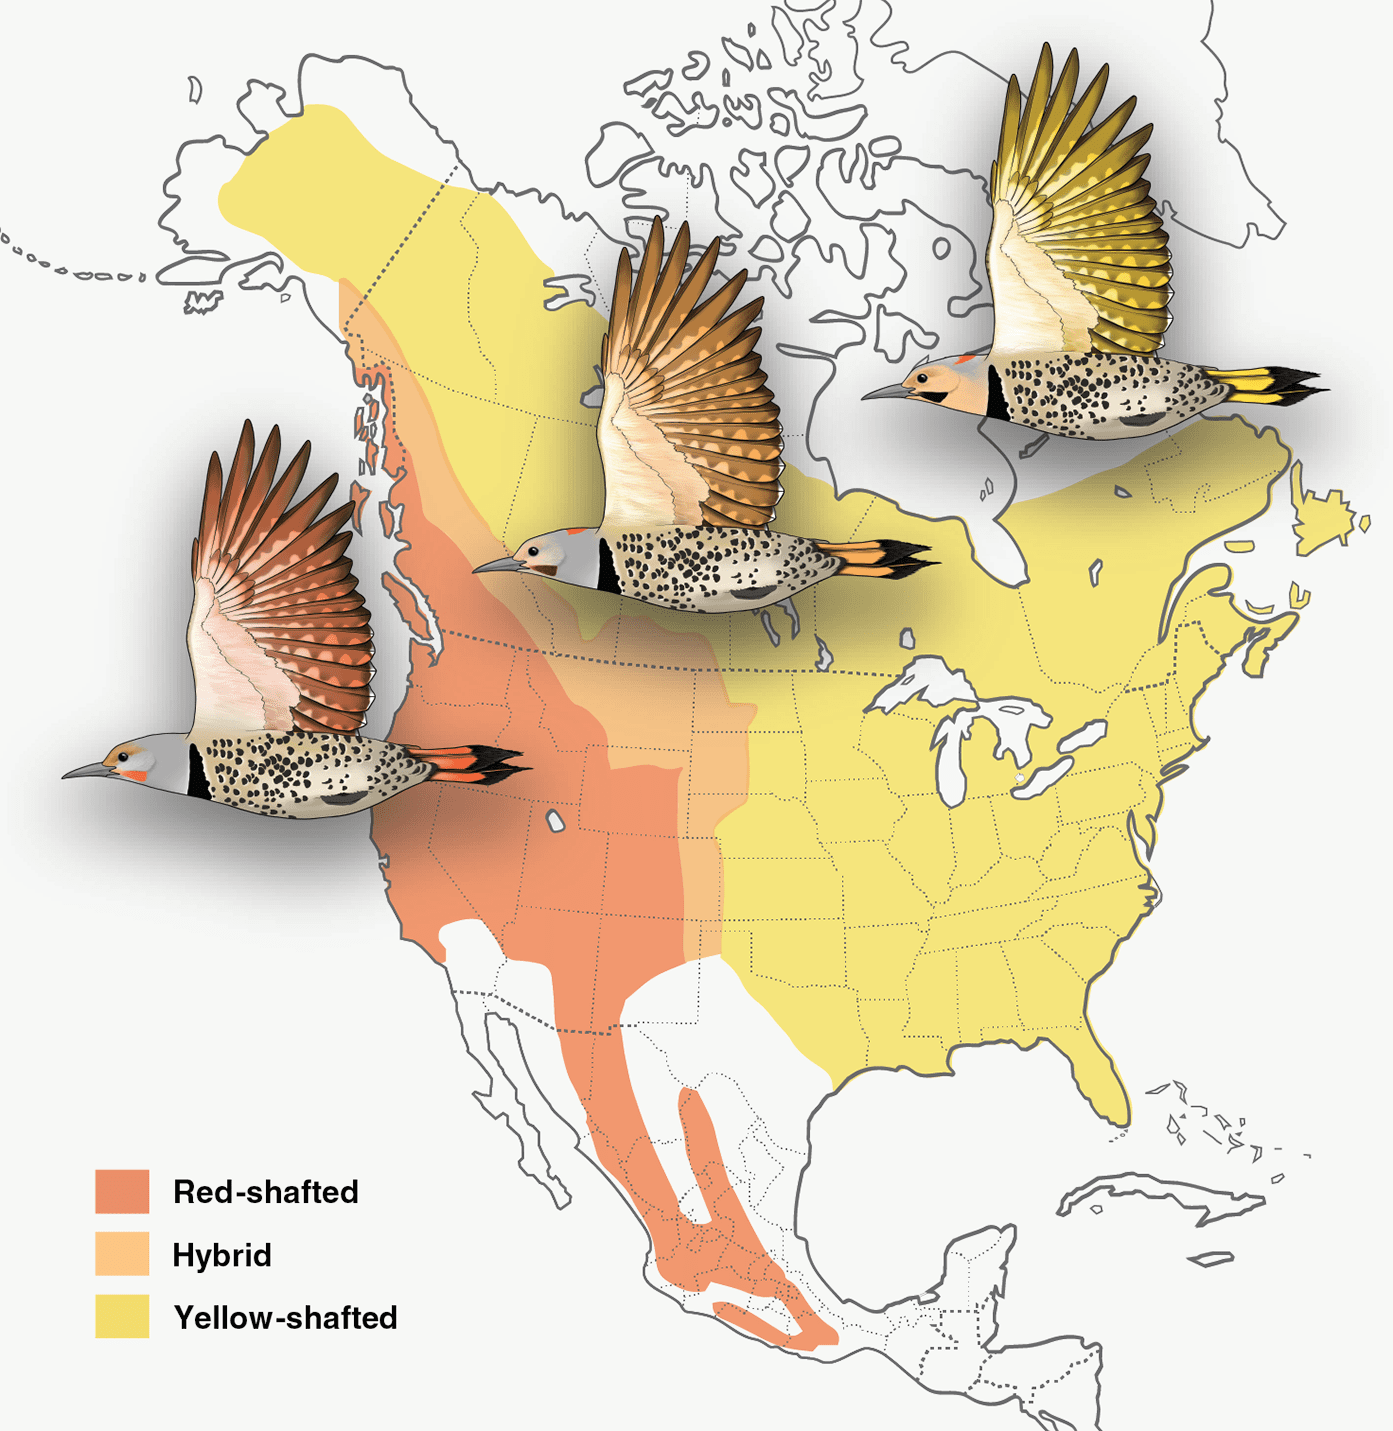 Color variation in flickers is caused by differences in just a few genes out of tens of thousands. Northern Flicker illustrations by Megan Bishop.